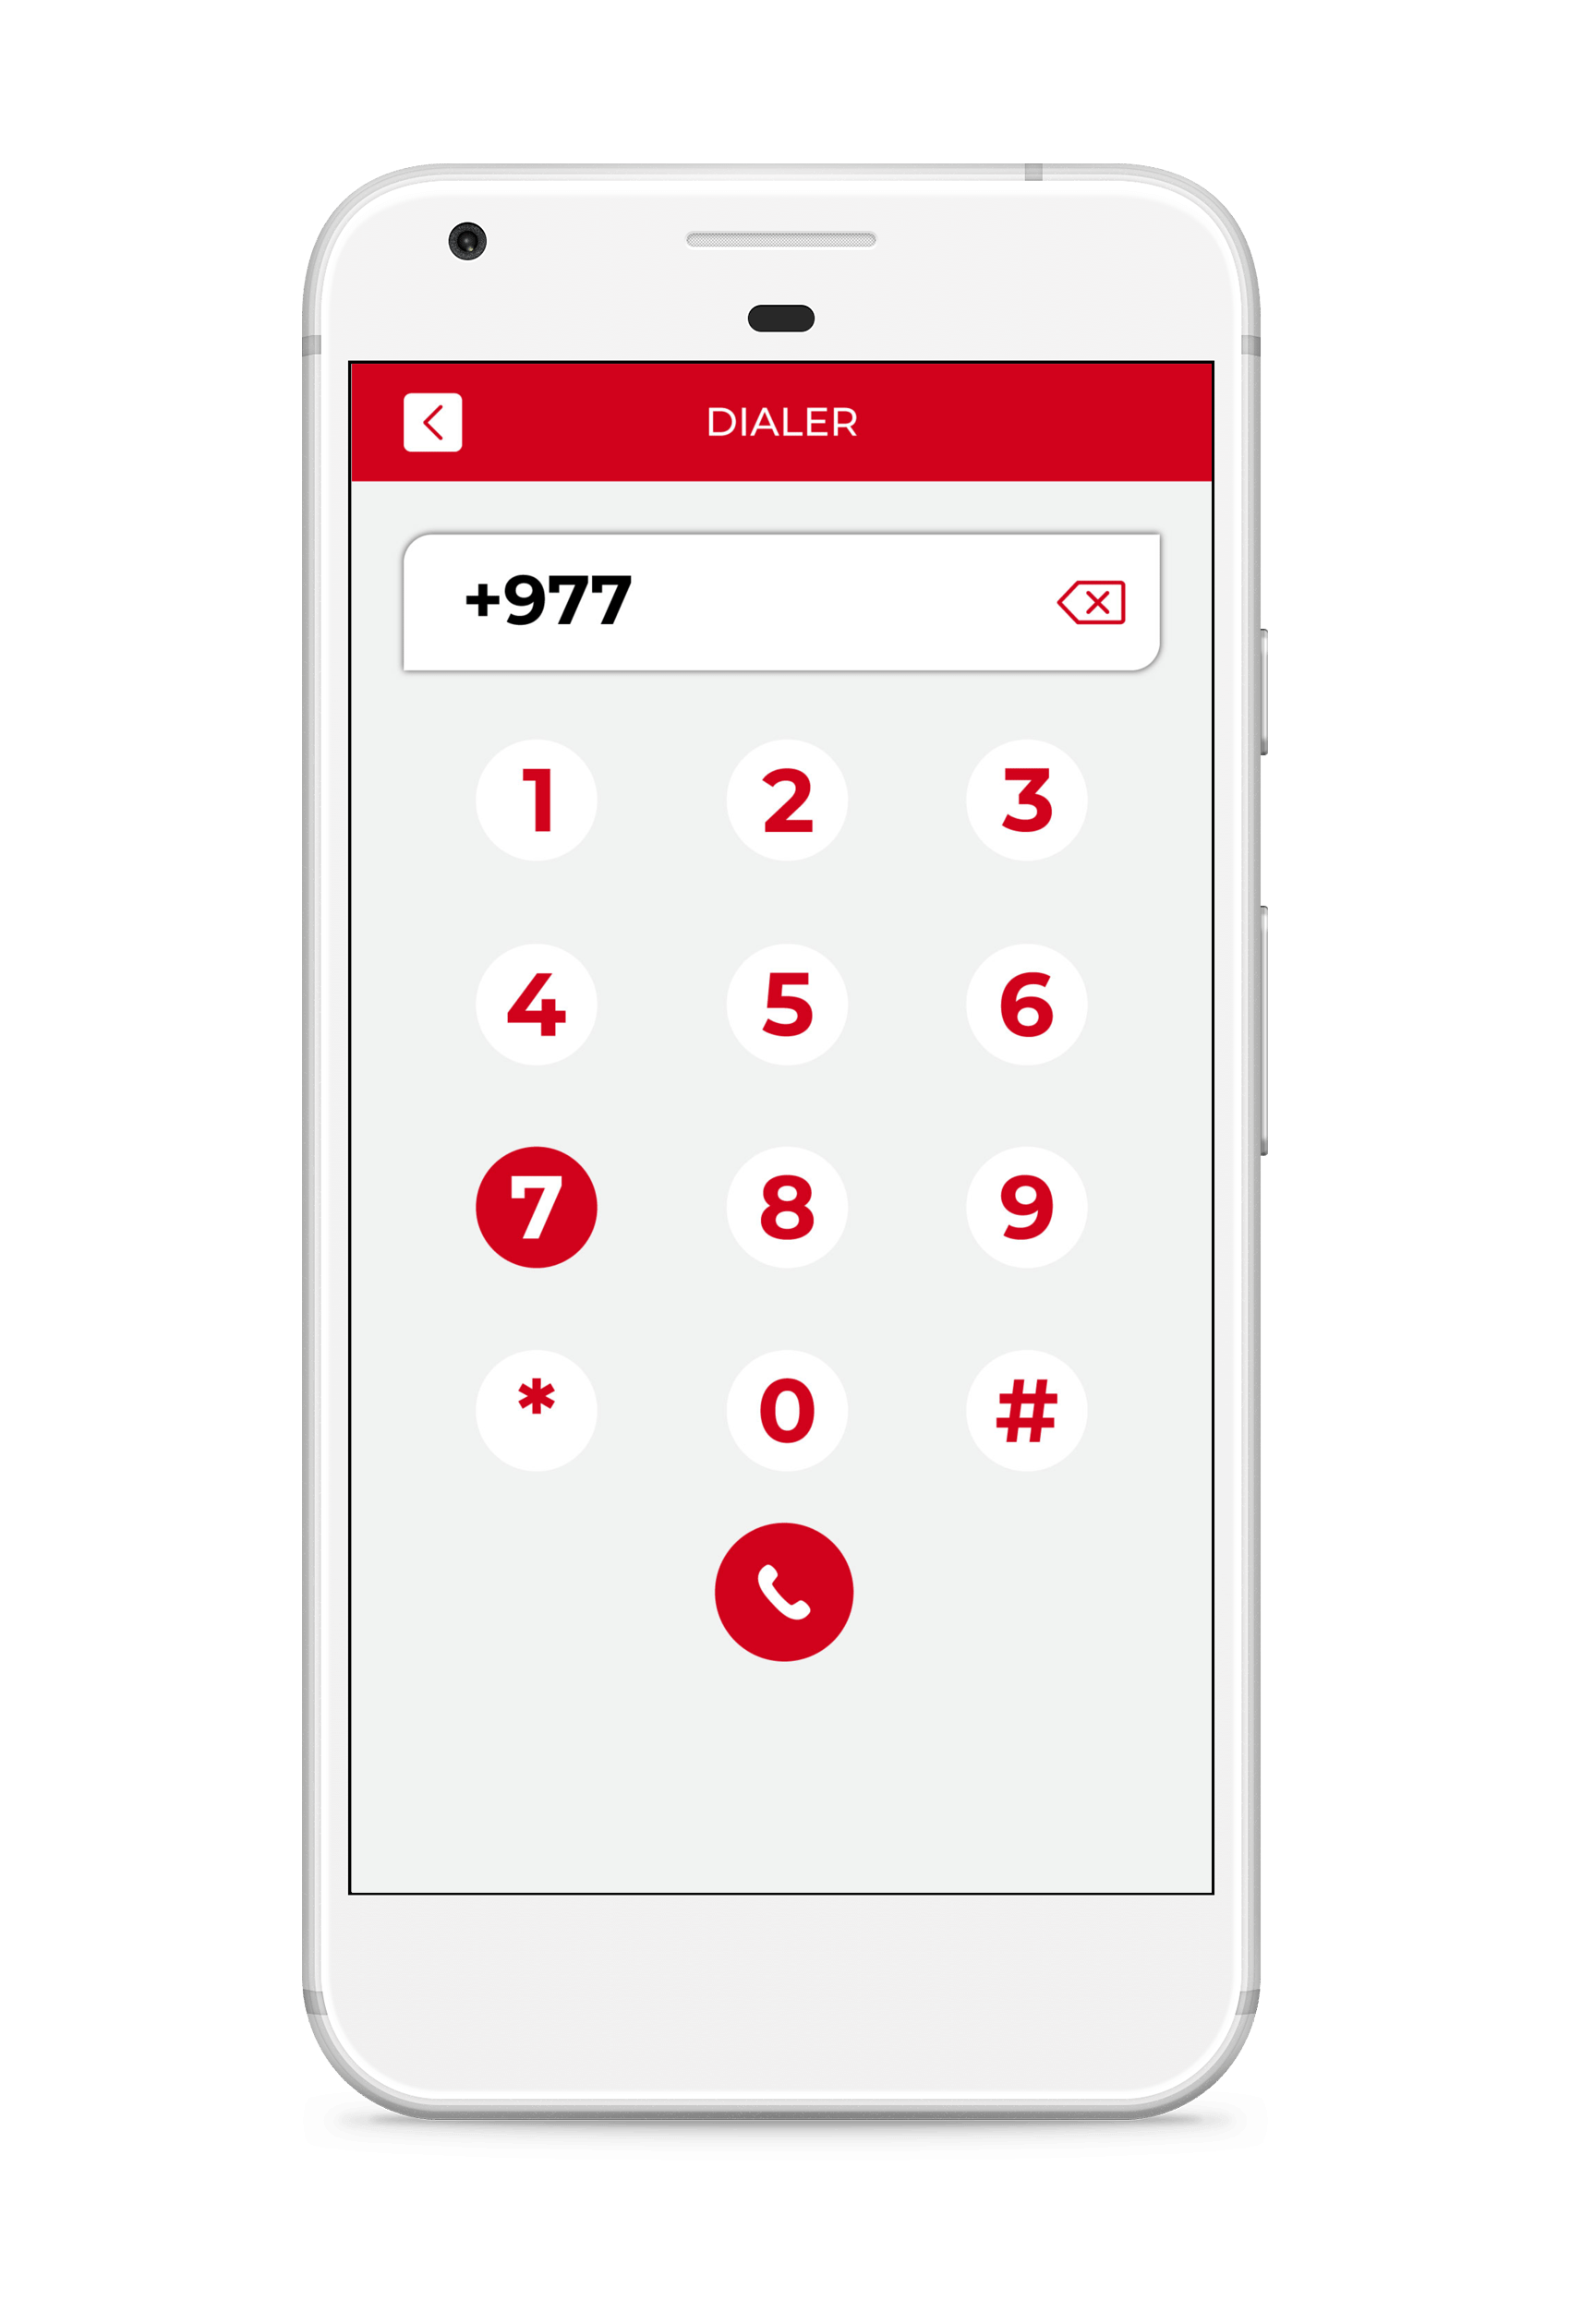 Second Phone Number dialer